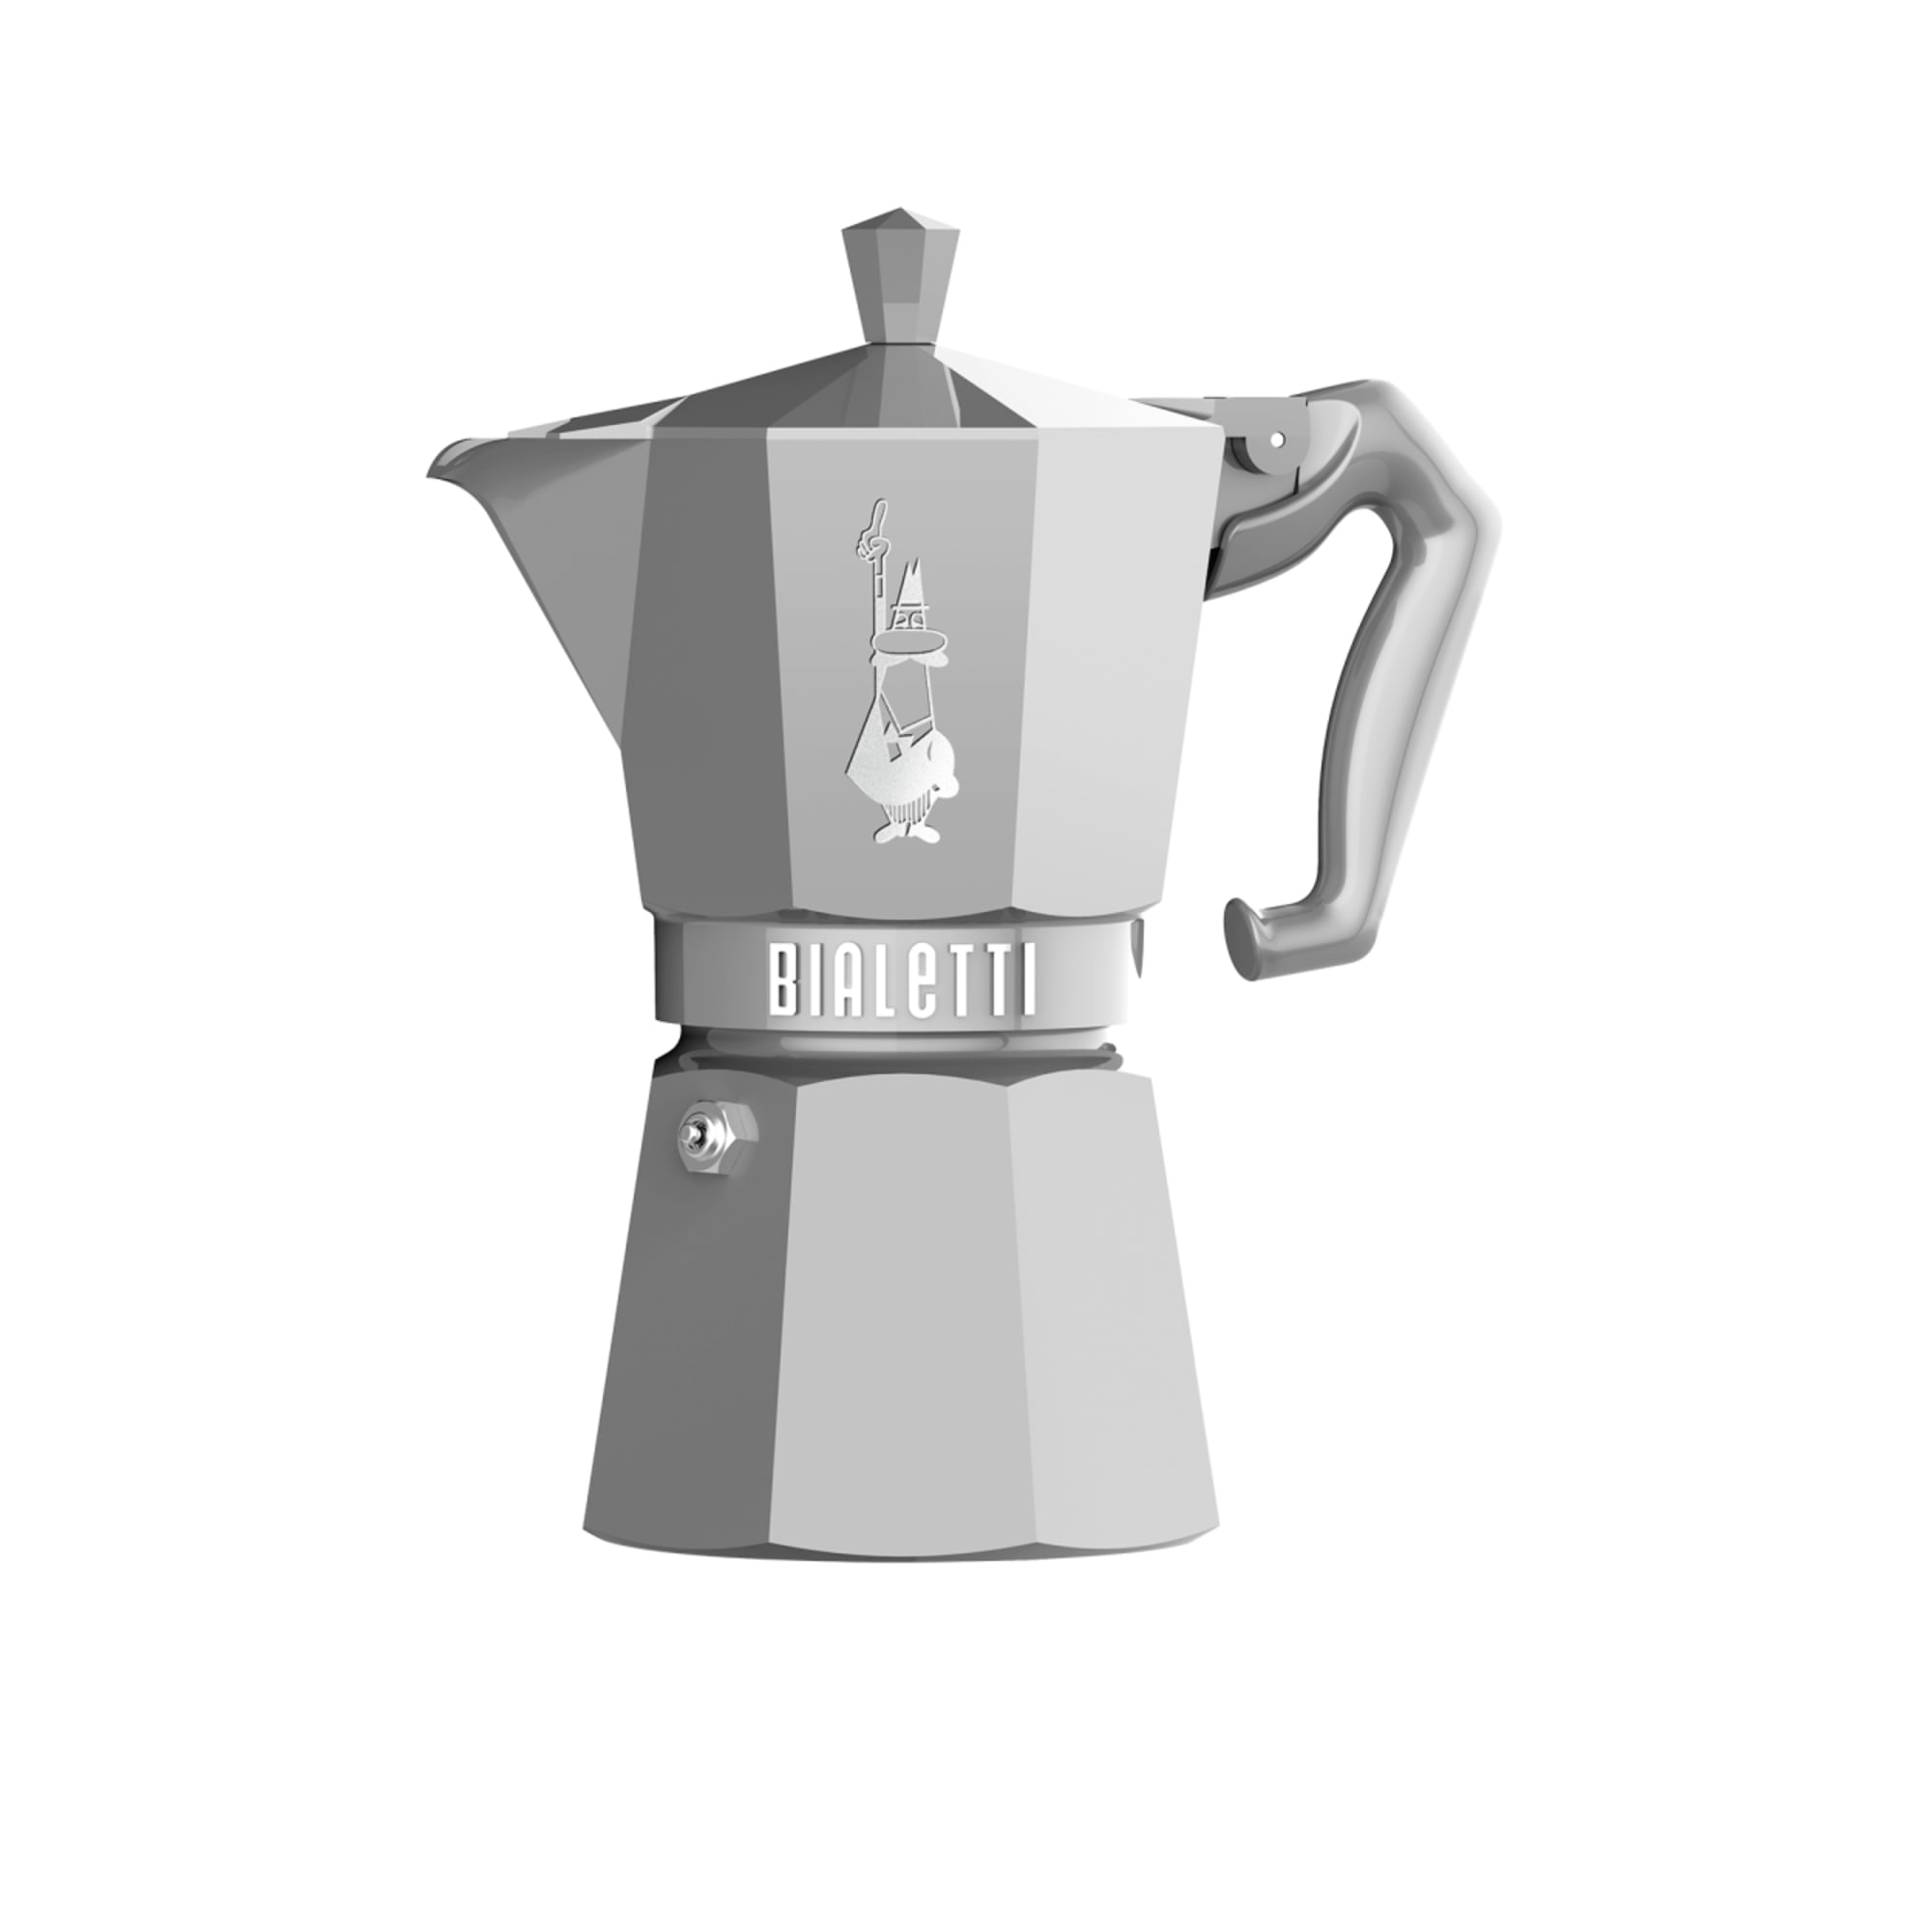 https://res.cloudinary.com/kitchenwarehouse/image/upload/c_fill,g_face,w_1250/f_auto/t_PDP_2000x2000/Supplier%20Images%20/2000px/Bialetti-Moka-Exclusive-Stovetop-Expresso-Maker-6-cup-Silver_1_2000px.jpg